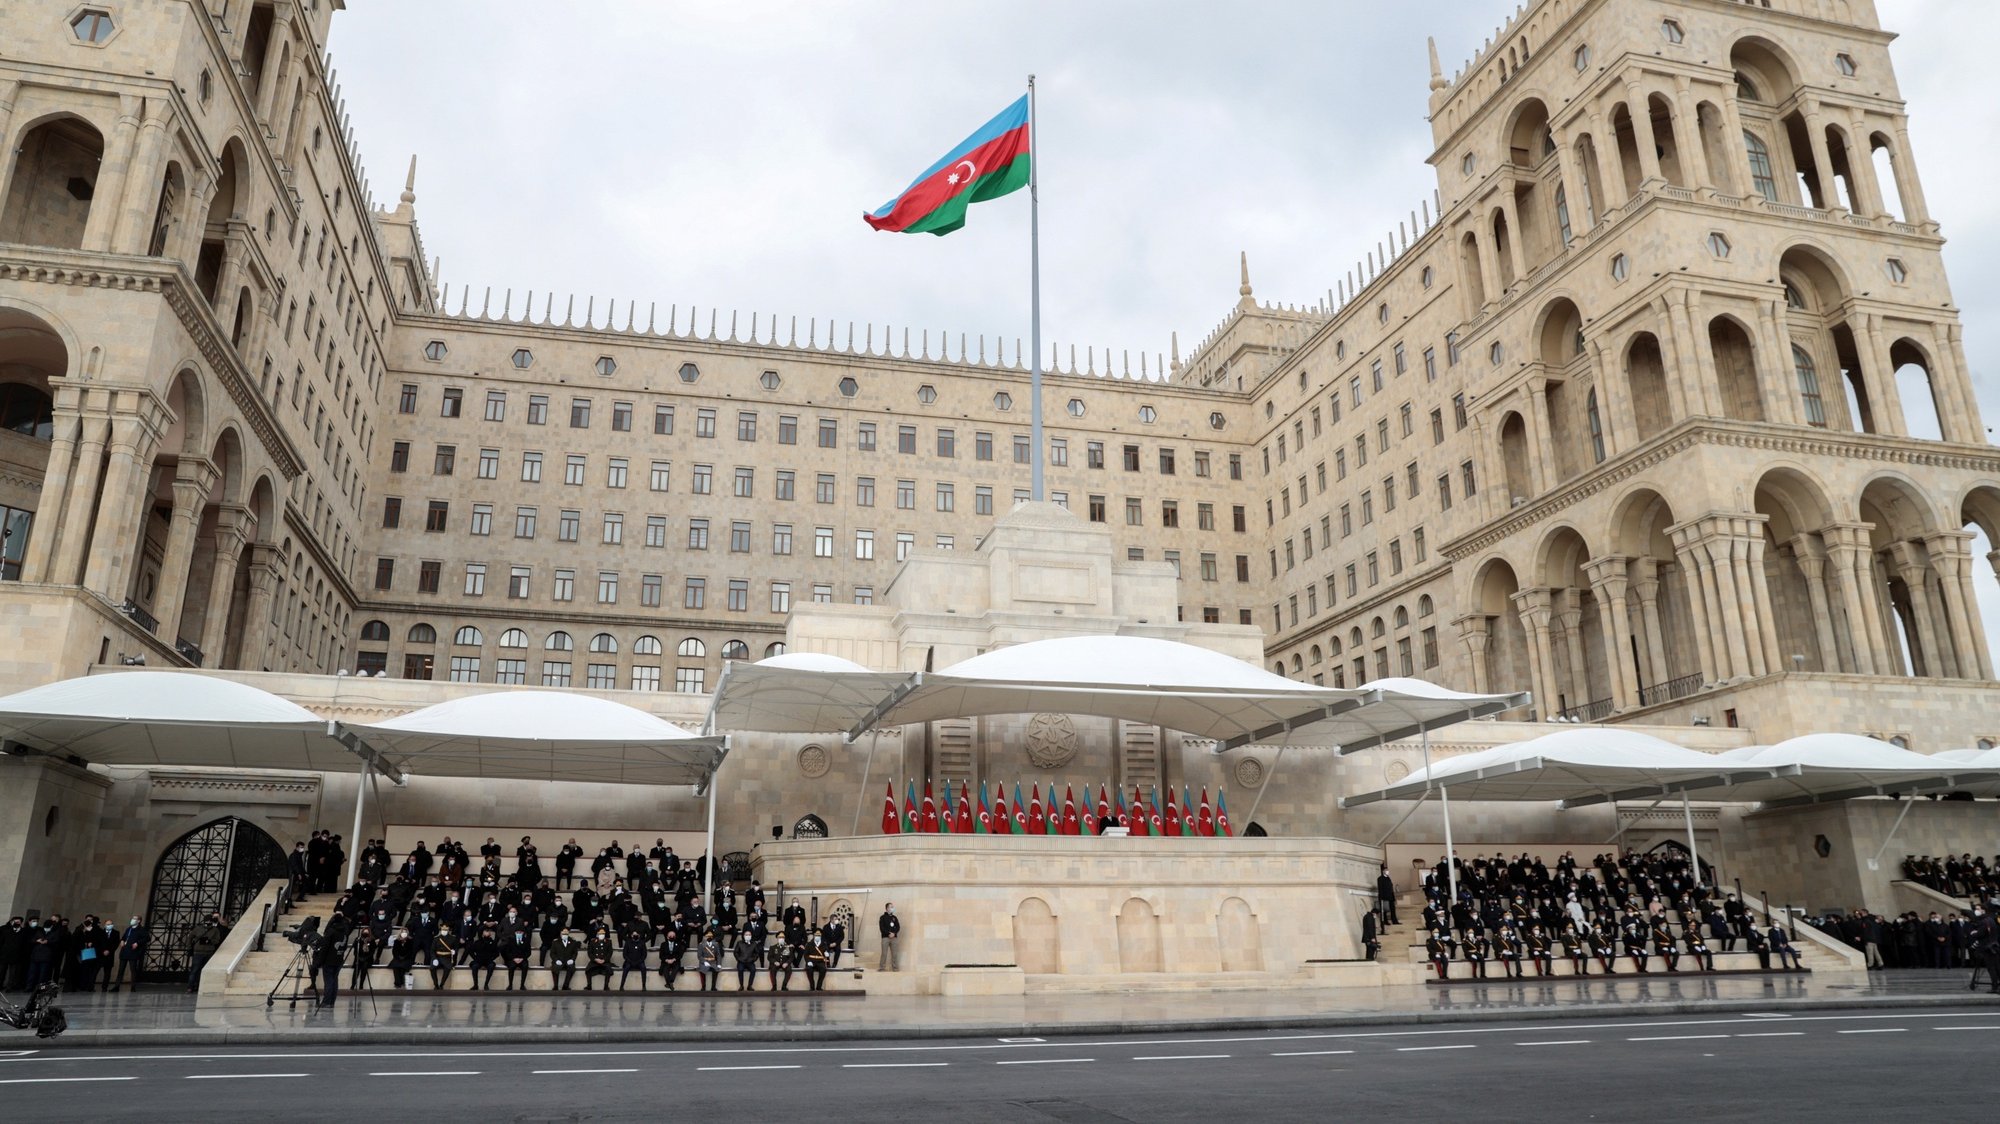 epa08874747 Azerbaijani President Ilham Aliyev (C) attends a military parade dedicated to the victory in the Nagorno-Karabakh armed conflict, in Baku, Azerbaijan, 10 December 2020. The simmering territorial conflict between Azerbaijan and Armenia over Nagorno-Karabakh territory erupted into a war between the two countries on 27 September 2020 along the contact line of the self-proclaimed Nagorno-Karabakh Republic (also known as Artsakh). On 09 November 2020 Presidents of Azerbaijan and Russia and Armenian Prime Minister signed a joint statement announcing a complete ceasefire and halt of all military operations in the Nagorno-Karabakh conflict zone, and return of the Aghdam, Kalbajar and Lachin districts to Azerbaijan.  EPA/POMAN ISMAYILOV